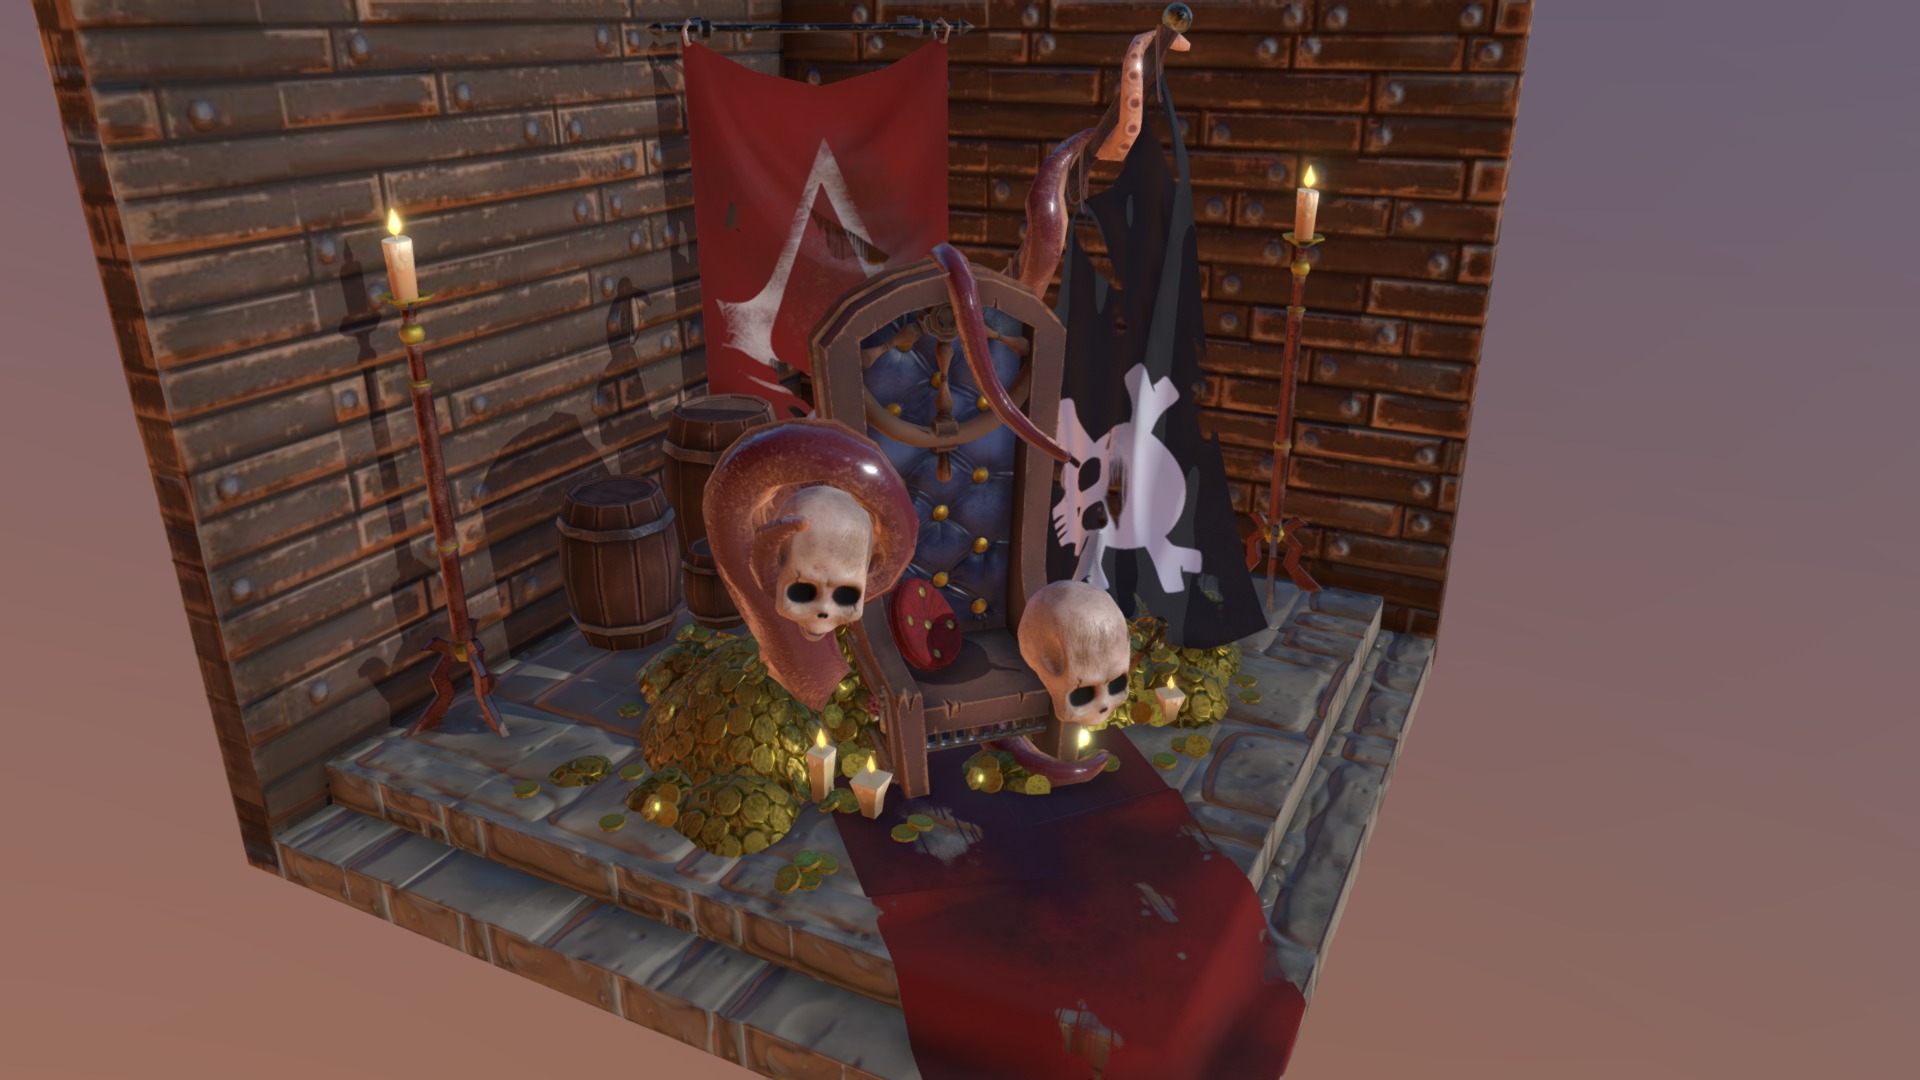 As part of my Ubisoft internship I was tasked with designing, modeling and texturing a diorama of a pirate throne in the Assassins Creed Rebellion style. Modeled in 3DS Max/ZBrush, and textured in Substance Painter 3d model